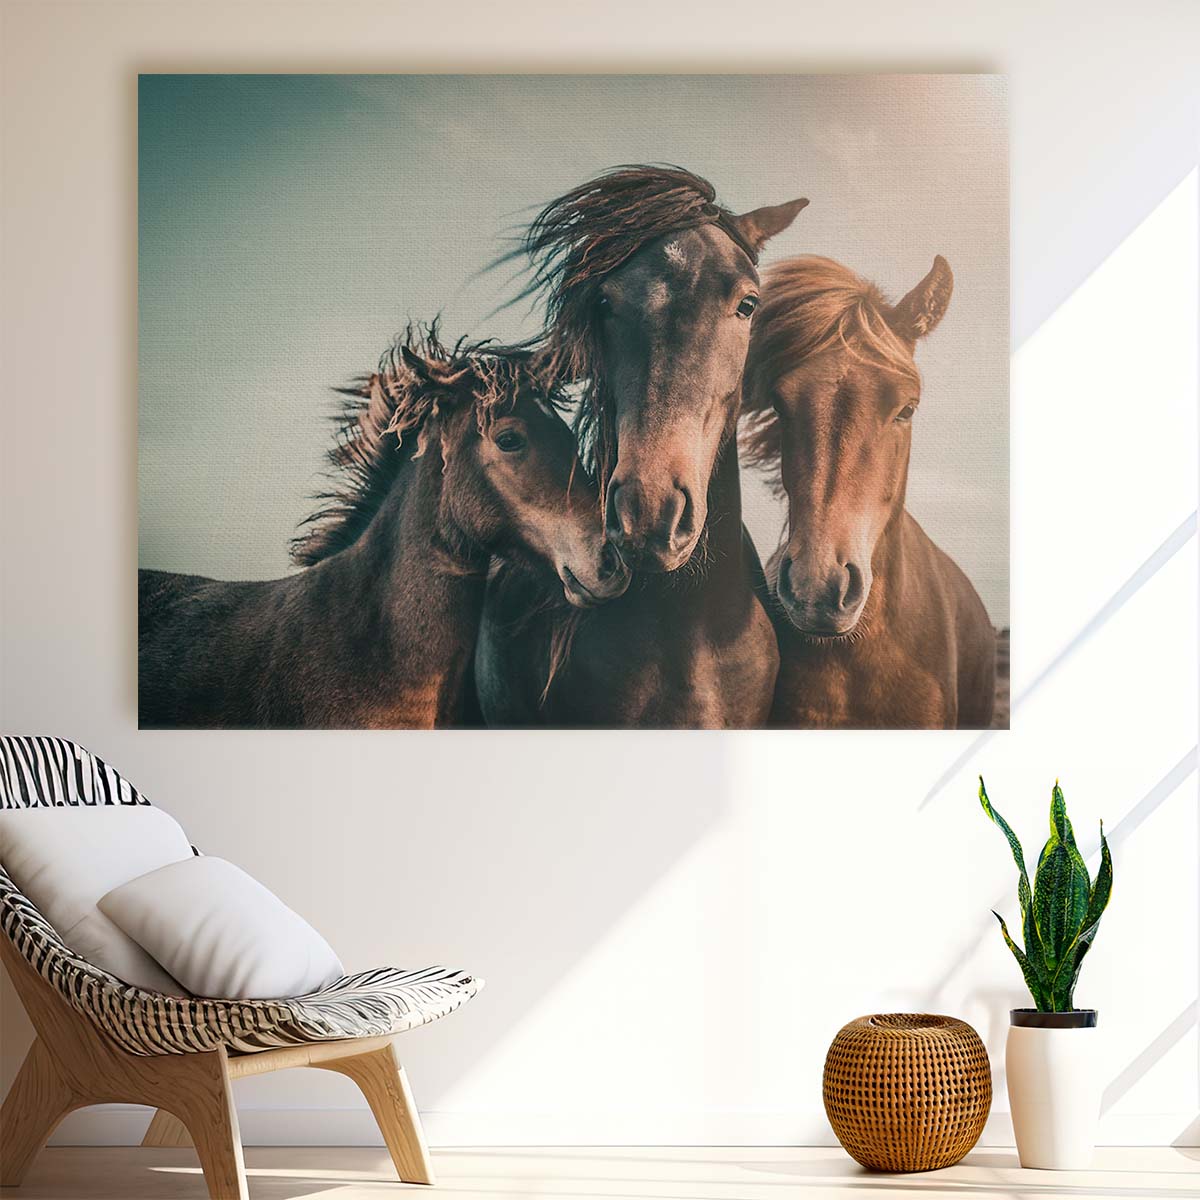 Icelandic Horse Family Sunset Seascape Wall Art by Luxuriance Designs. Made in USA.